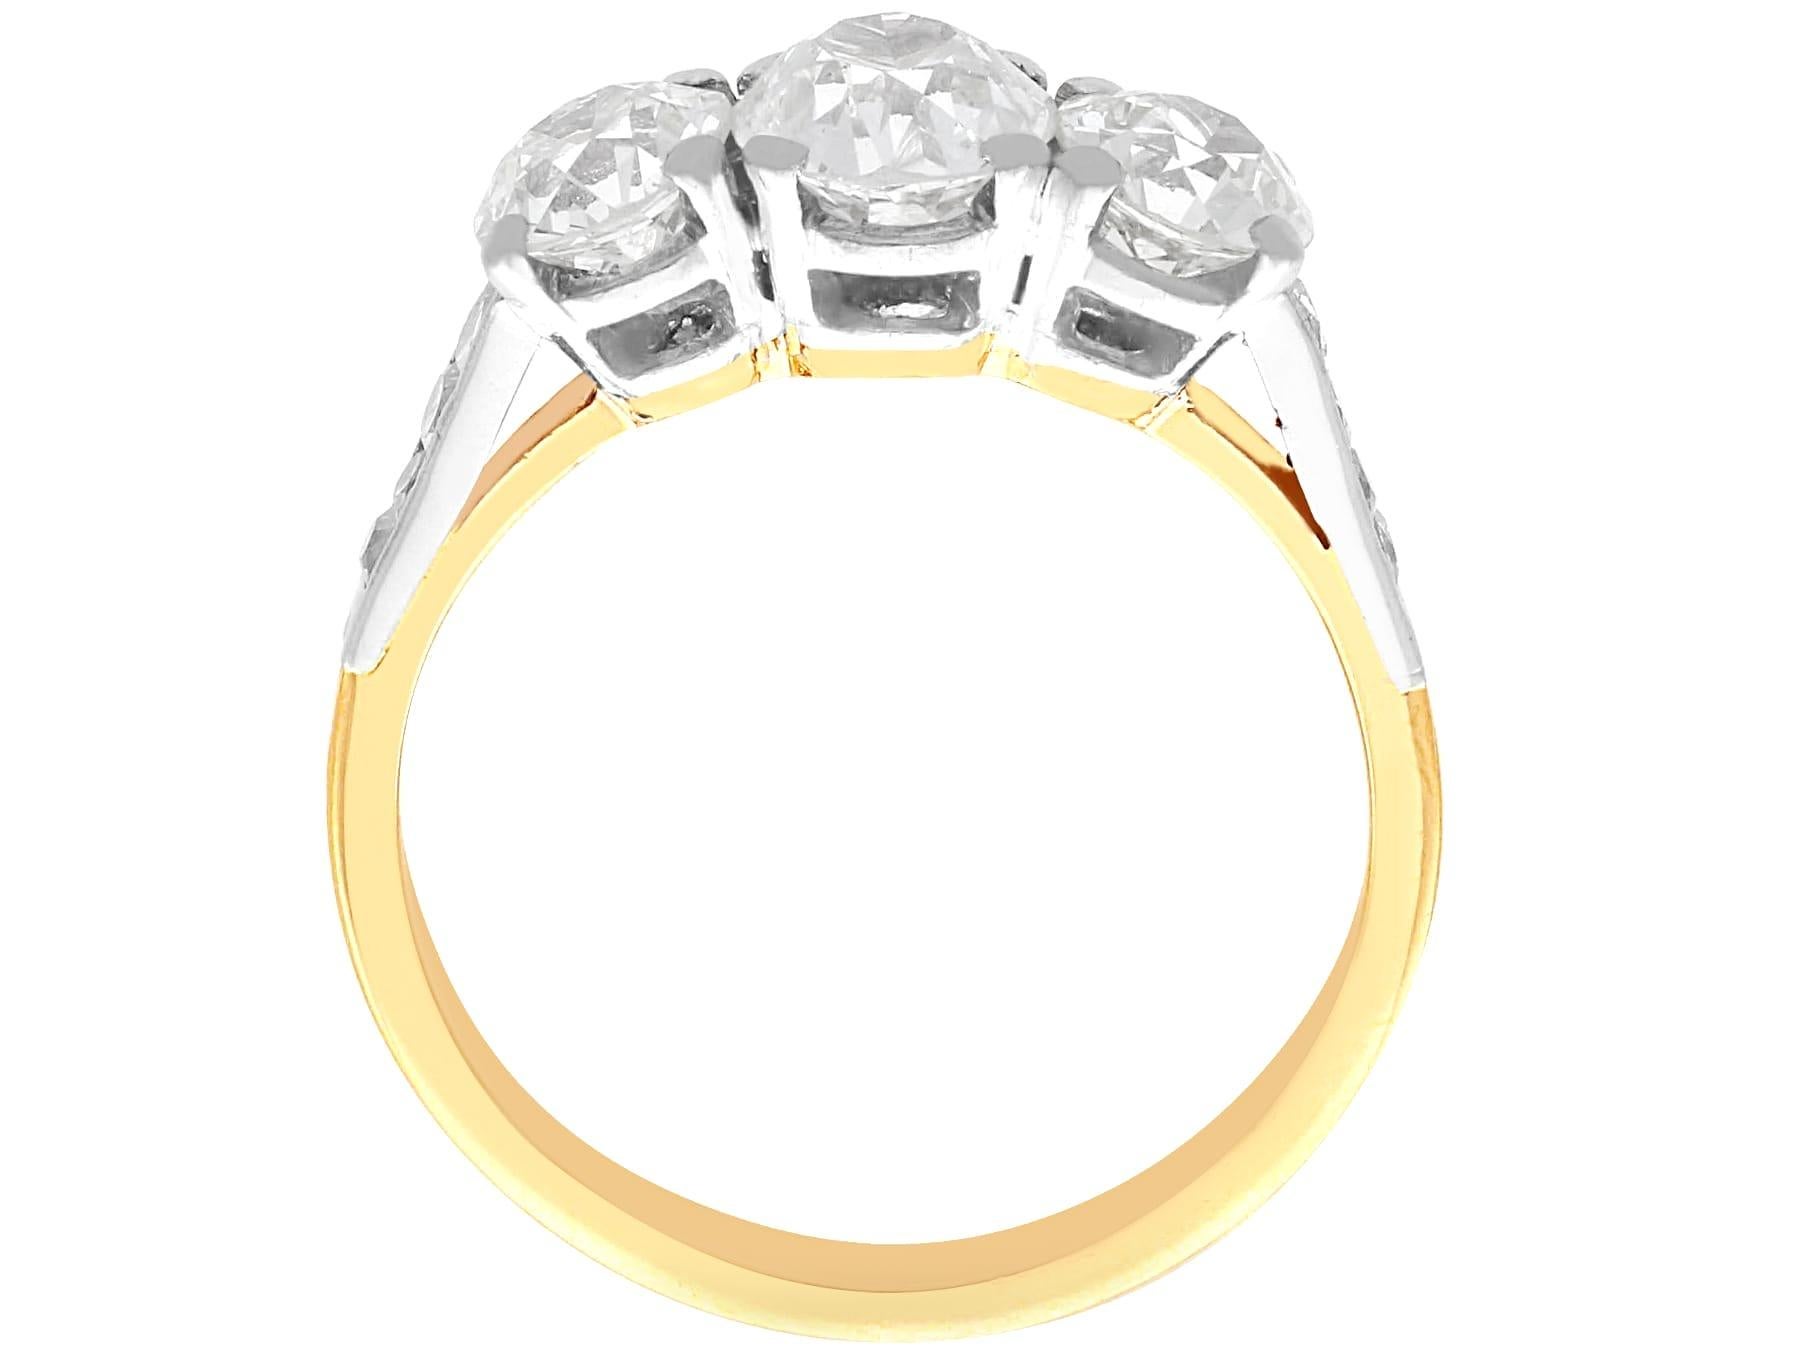 Antique 2.63Ct Diamond and 18k Yellow Gold Trilogy Ring Circa 1925 For Sale 1